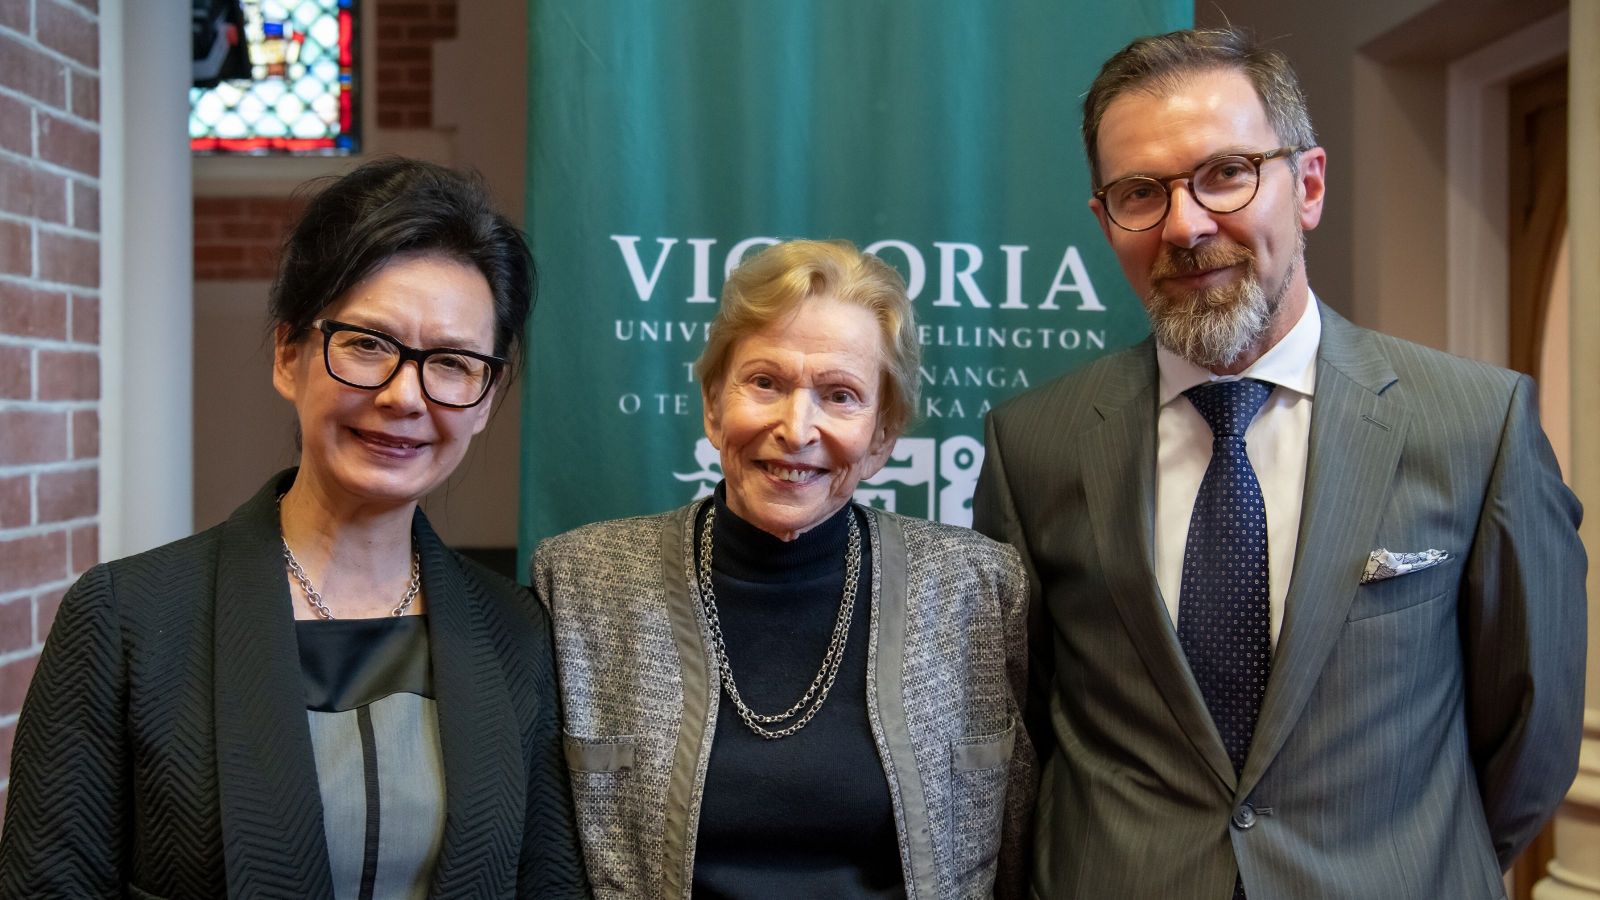 Two women and a man in front of a banner with victoria university on